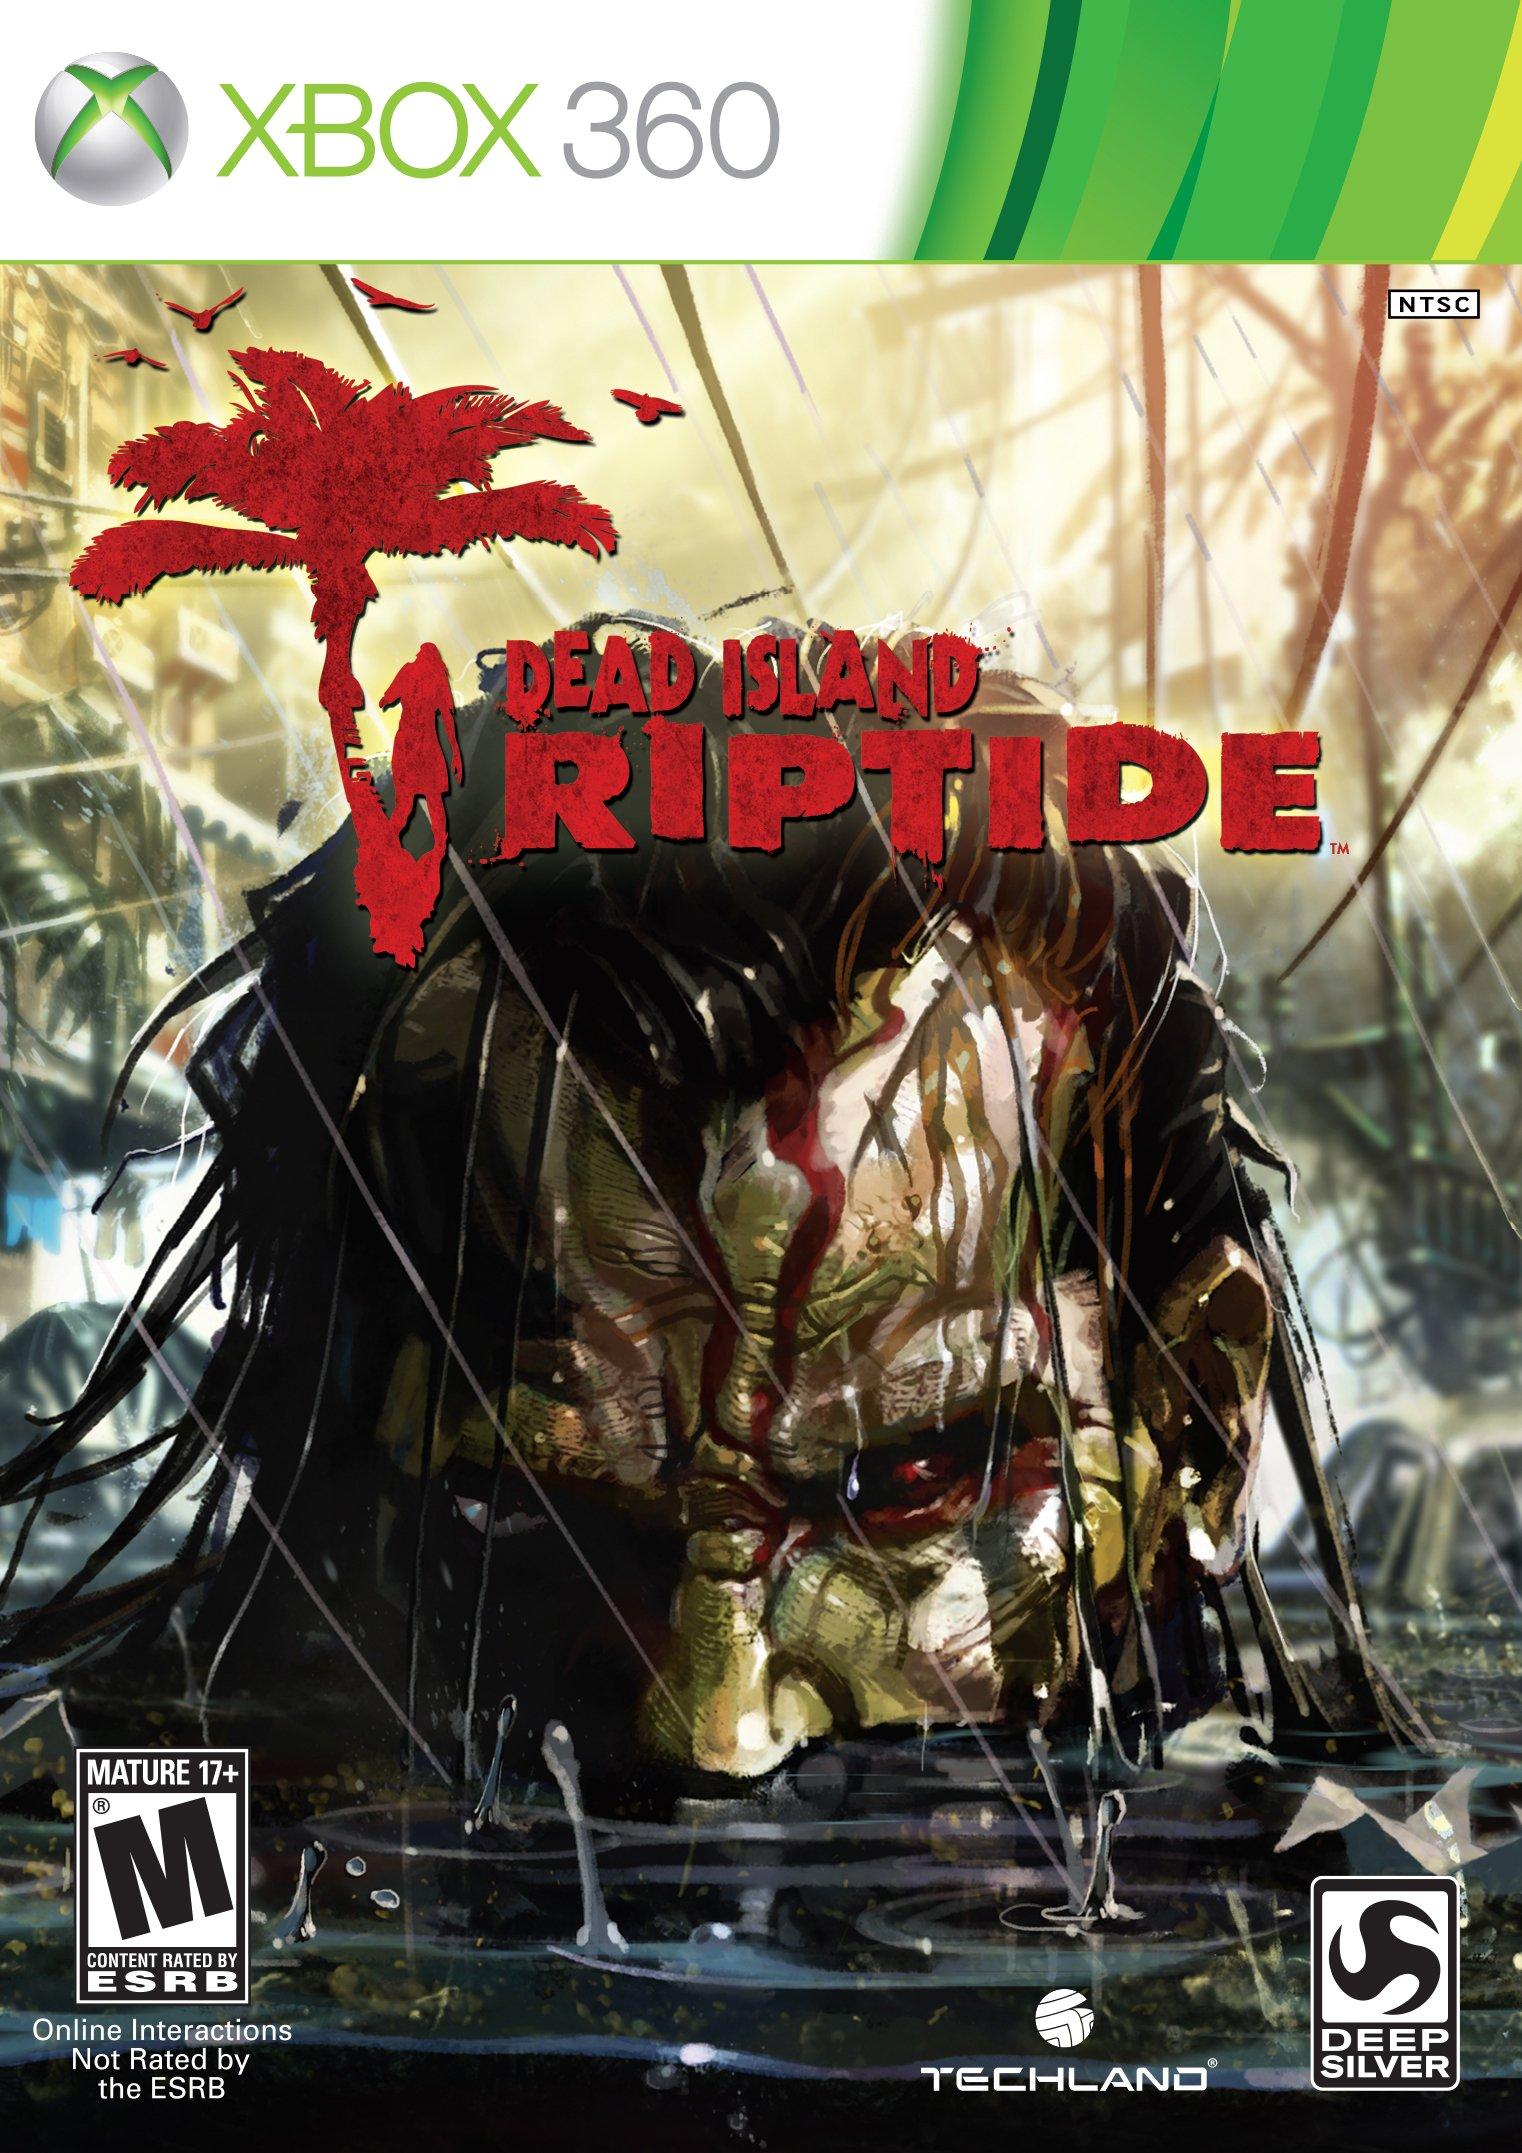 Buy Dead Island: Riptide Definitive Edition from the Humble Store